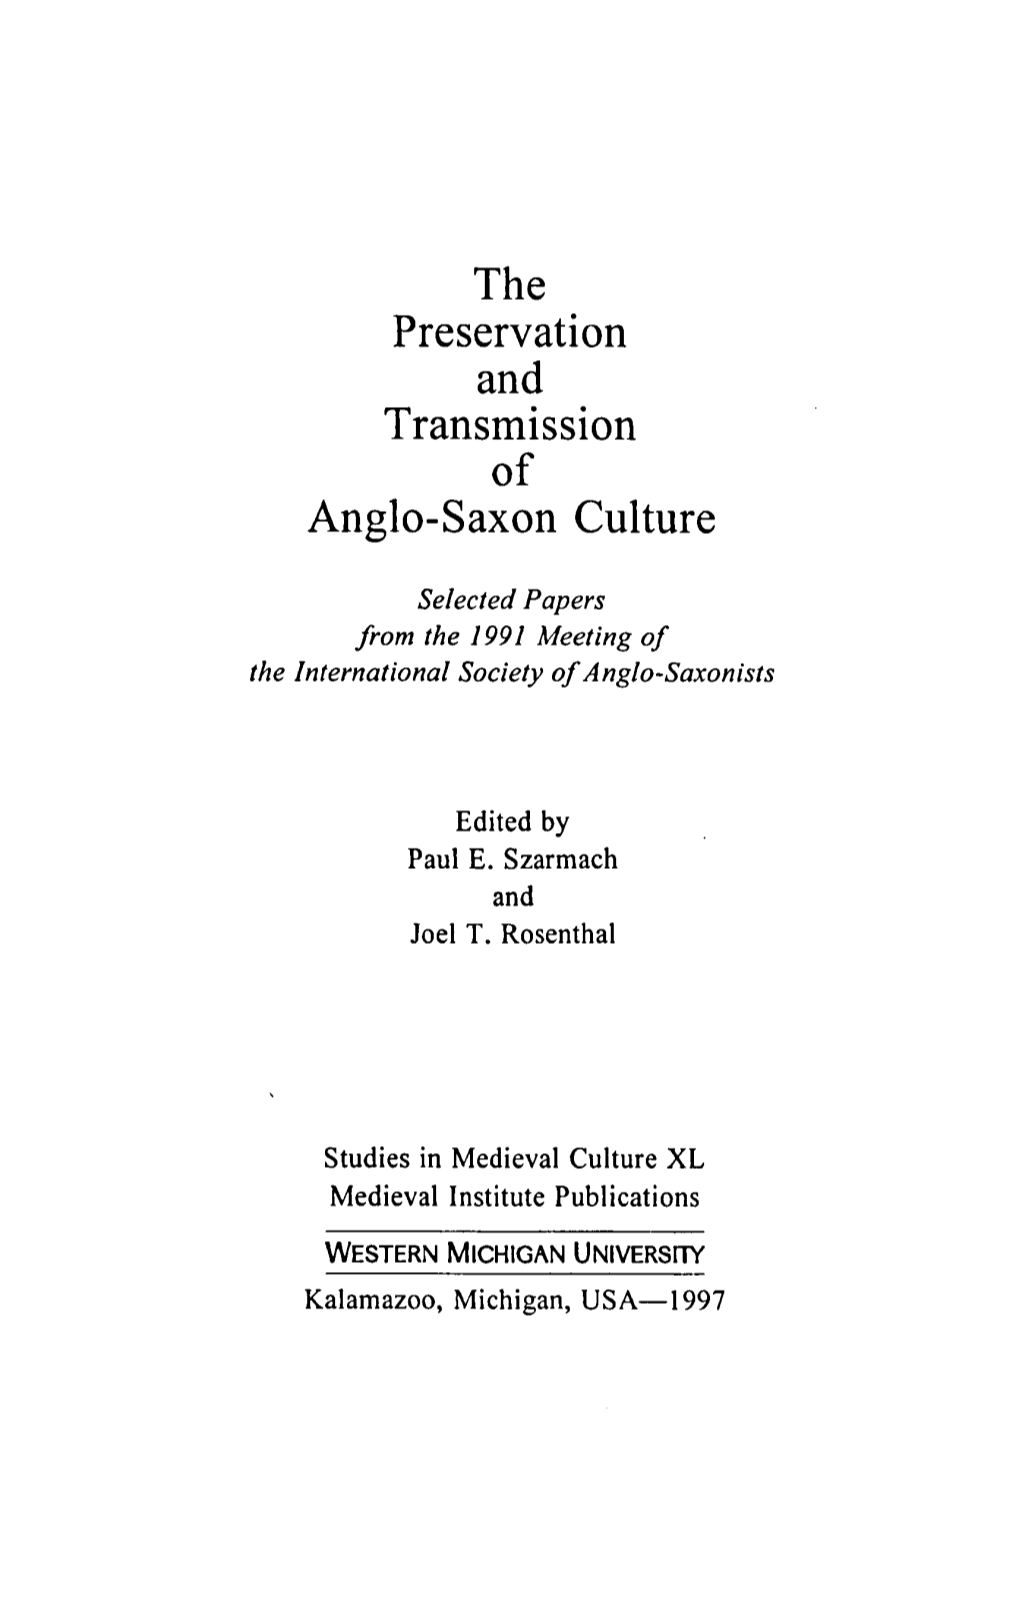 The Preservation and Transmission of Anglo-Saxon Culture